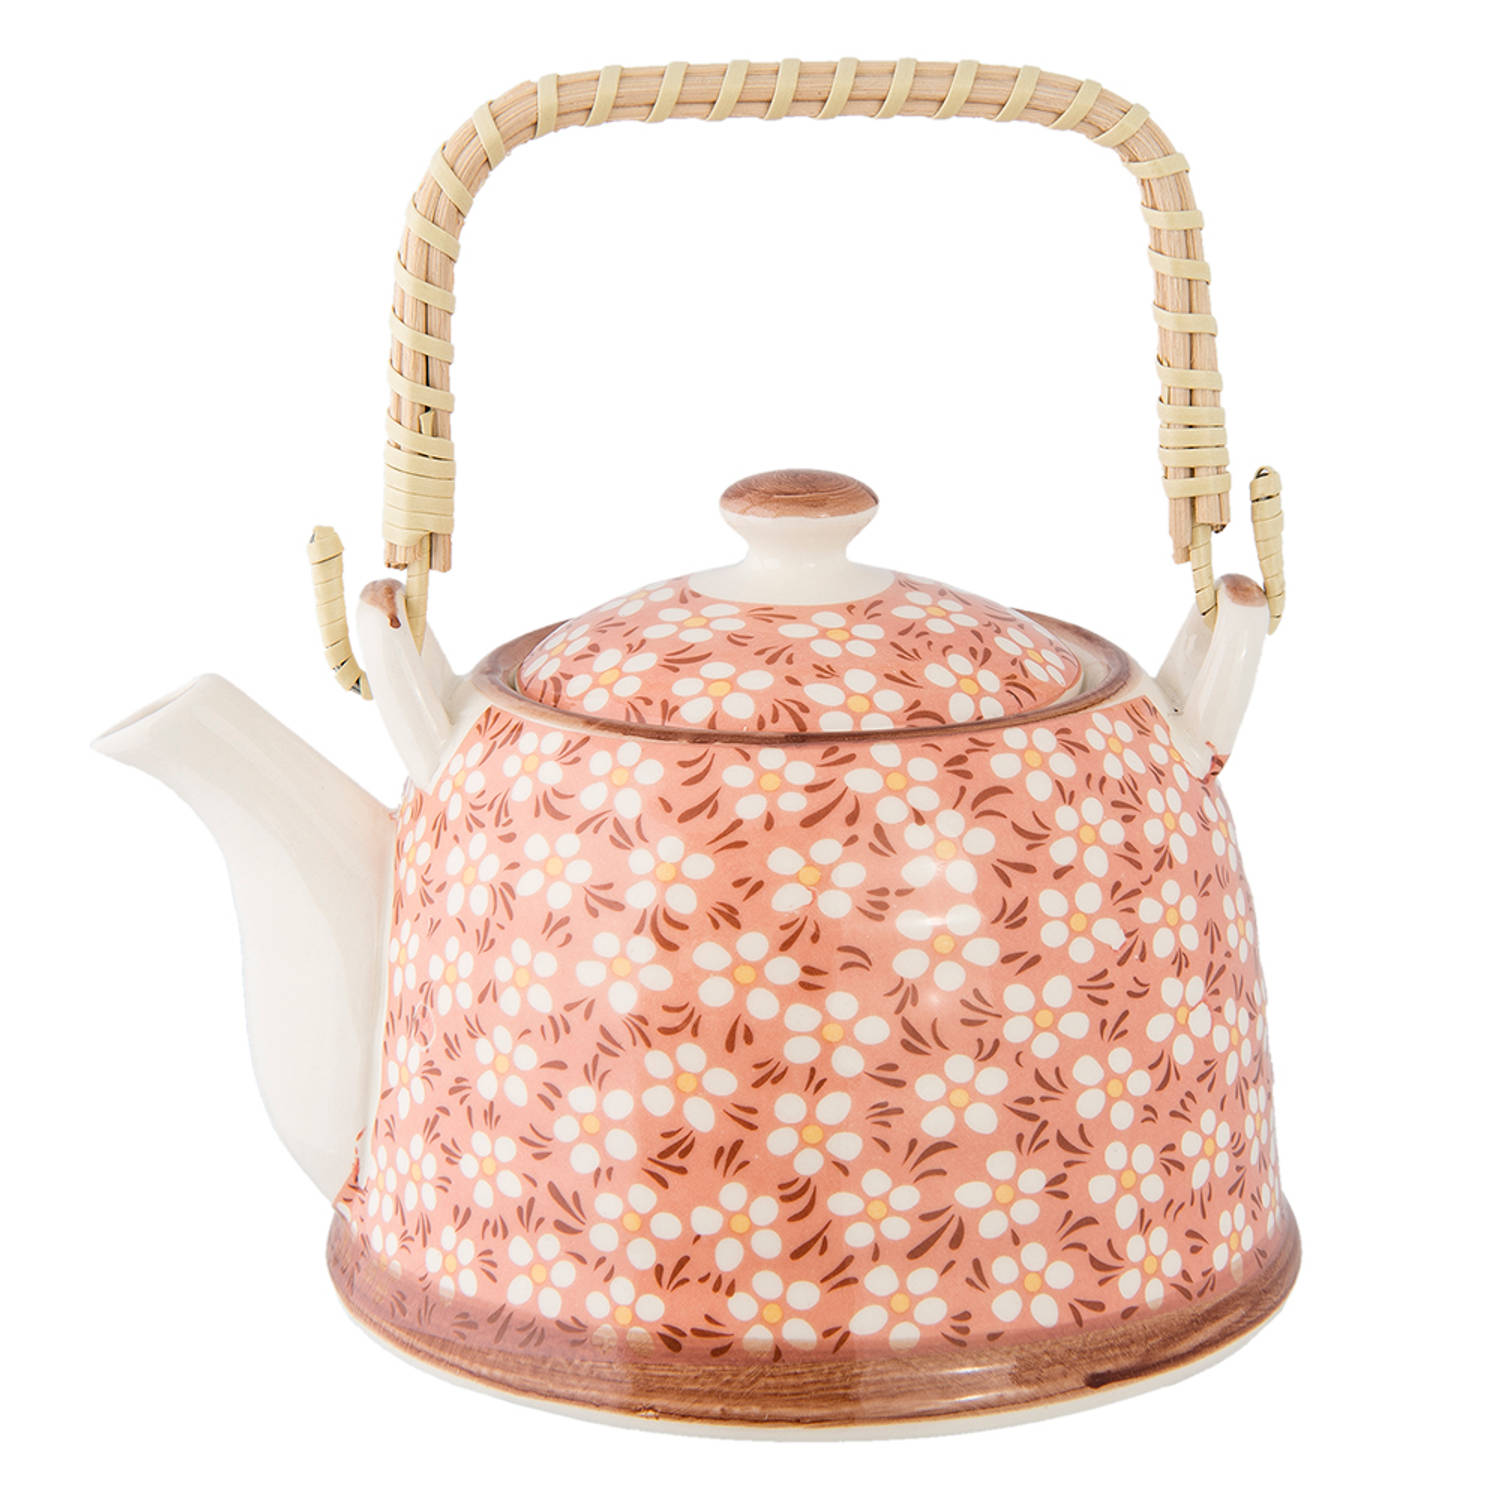 HAES DECO - Chinese Theepot - Porselein - Wit, Rode Bloemen - Theepot 700 ml - Traditioneel Theeservies, Theekan